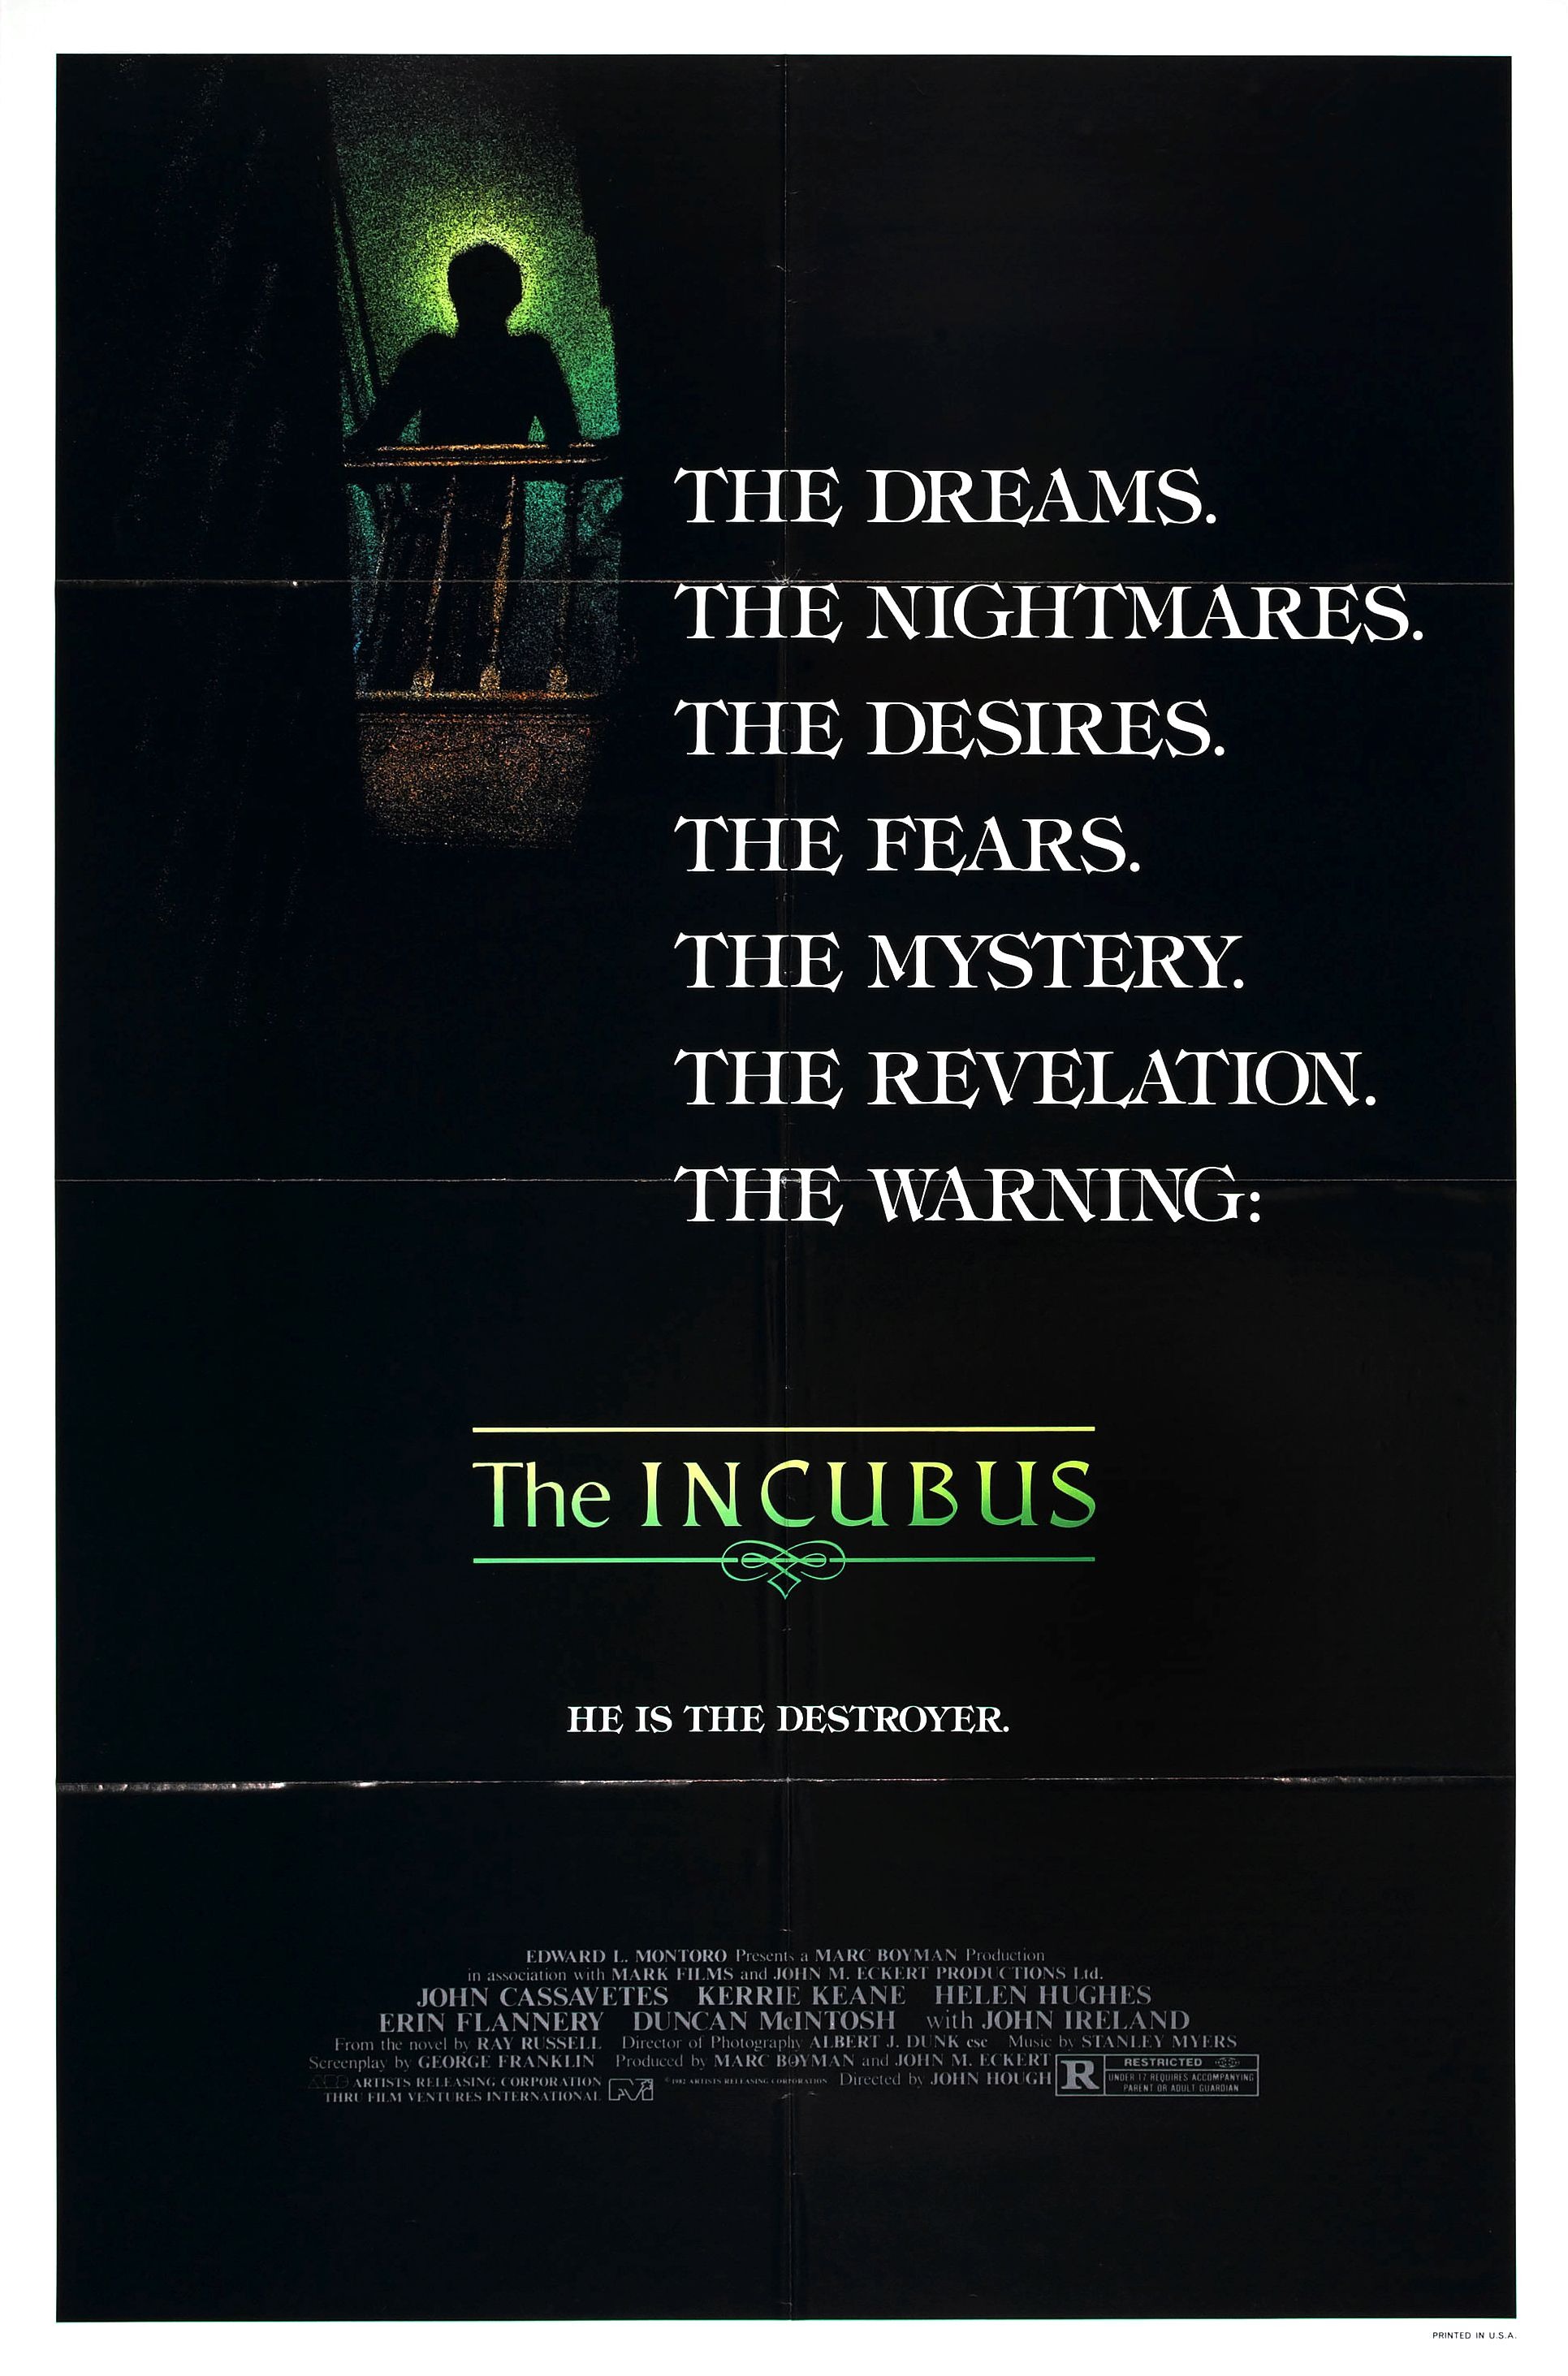 Mega Sized Movie Poster Image for The Incubus 